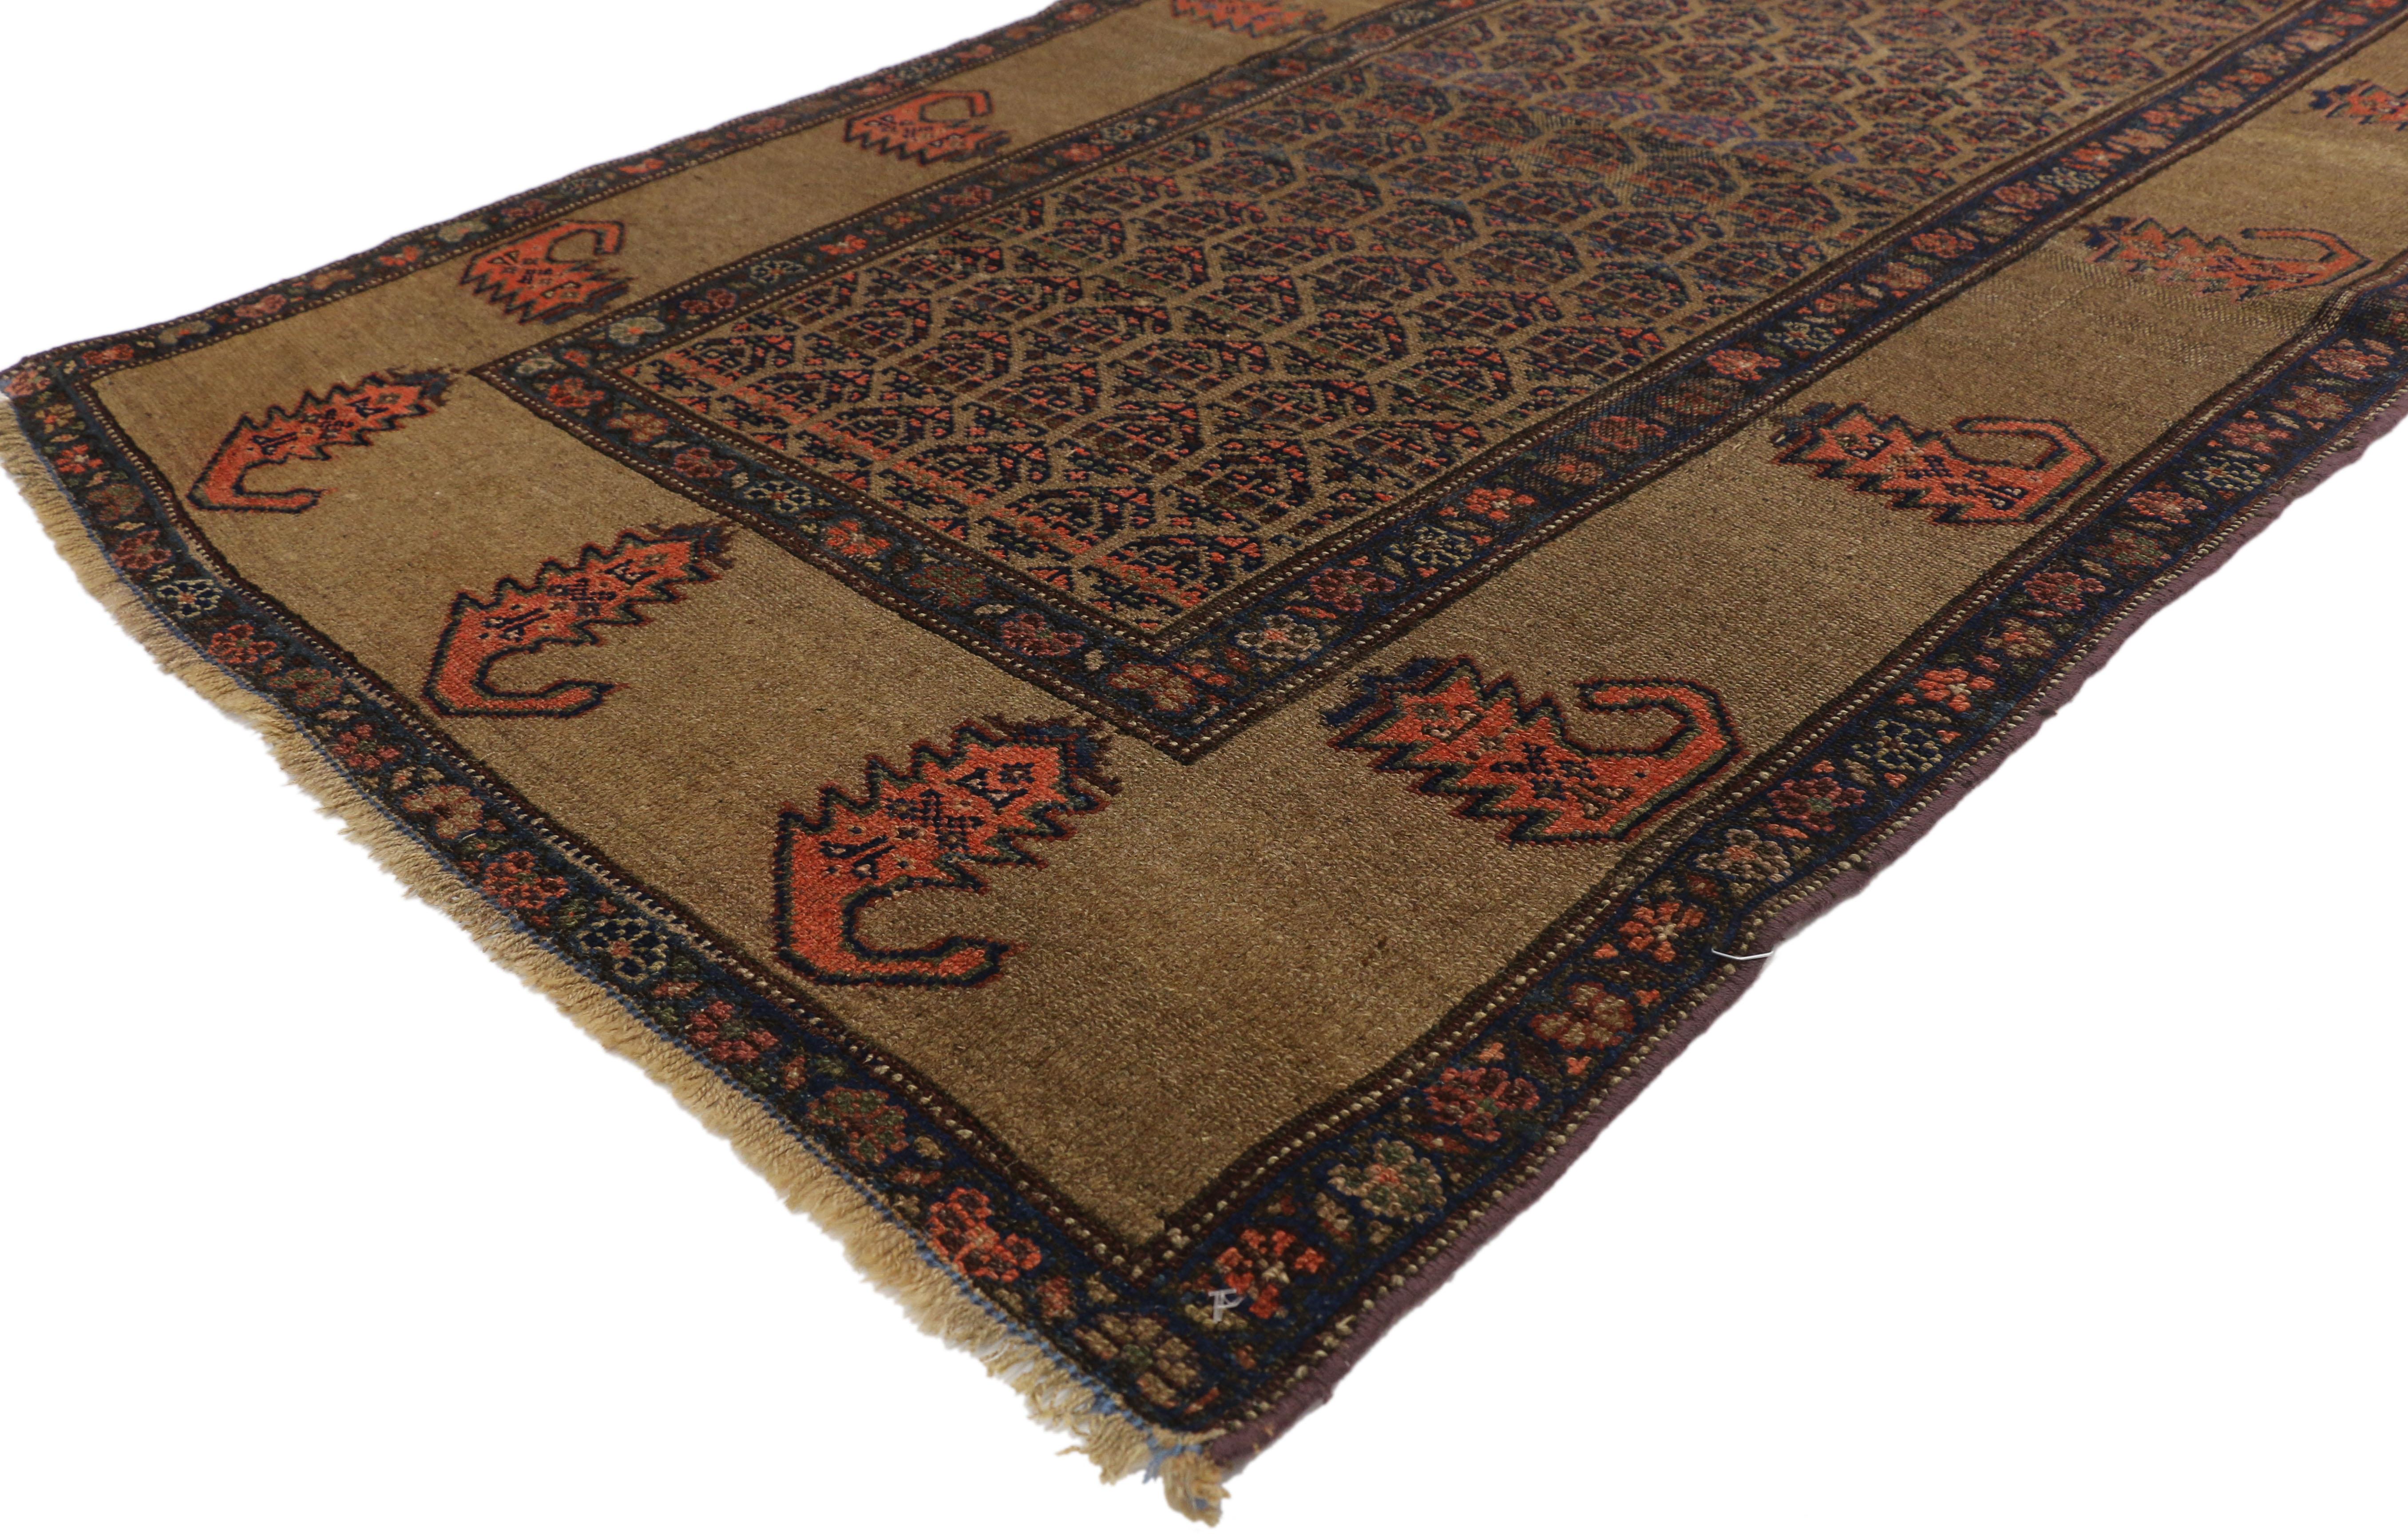 Modest yet full of character, this antique Persian Malayer rug features a modern traditional style displays an all-over repetitive pattern of symbolic boteh motifs in the center medallion surrounded by a brown border. The boteh resembles sprouting